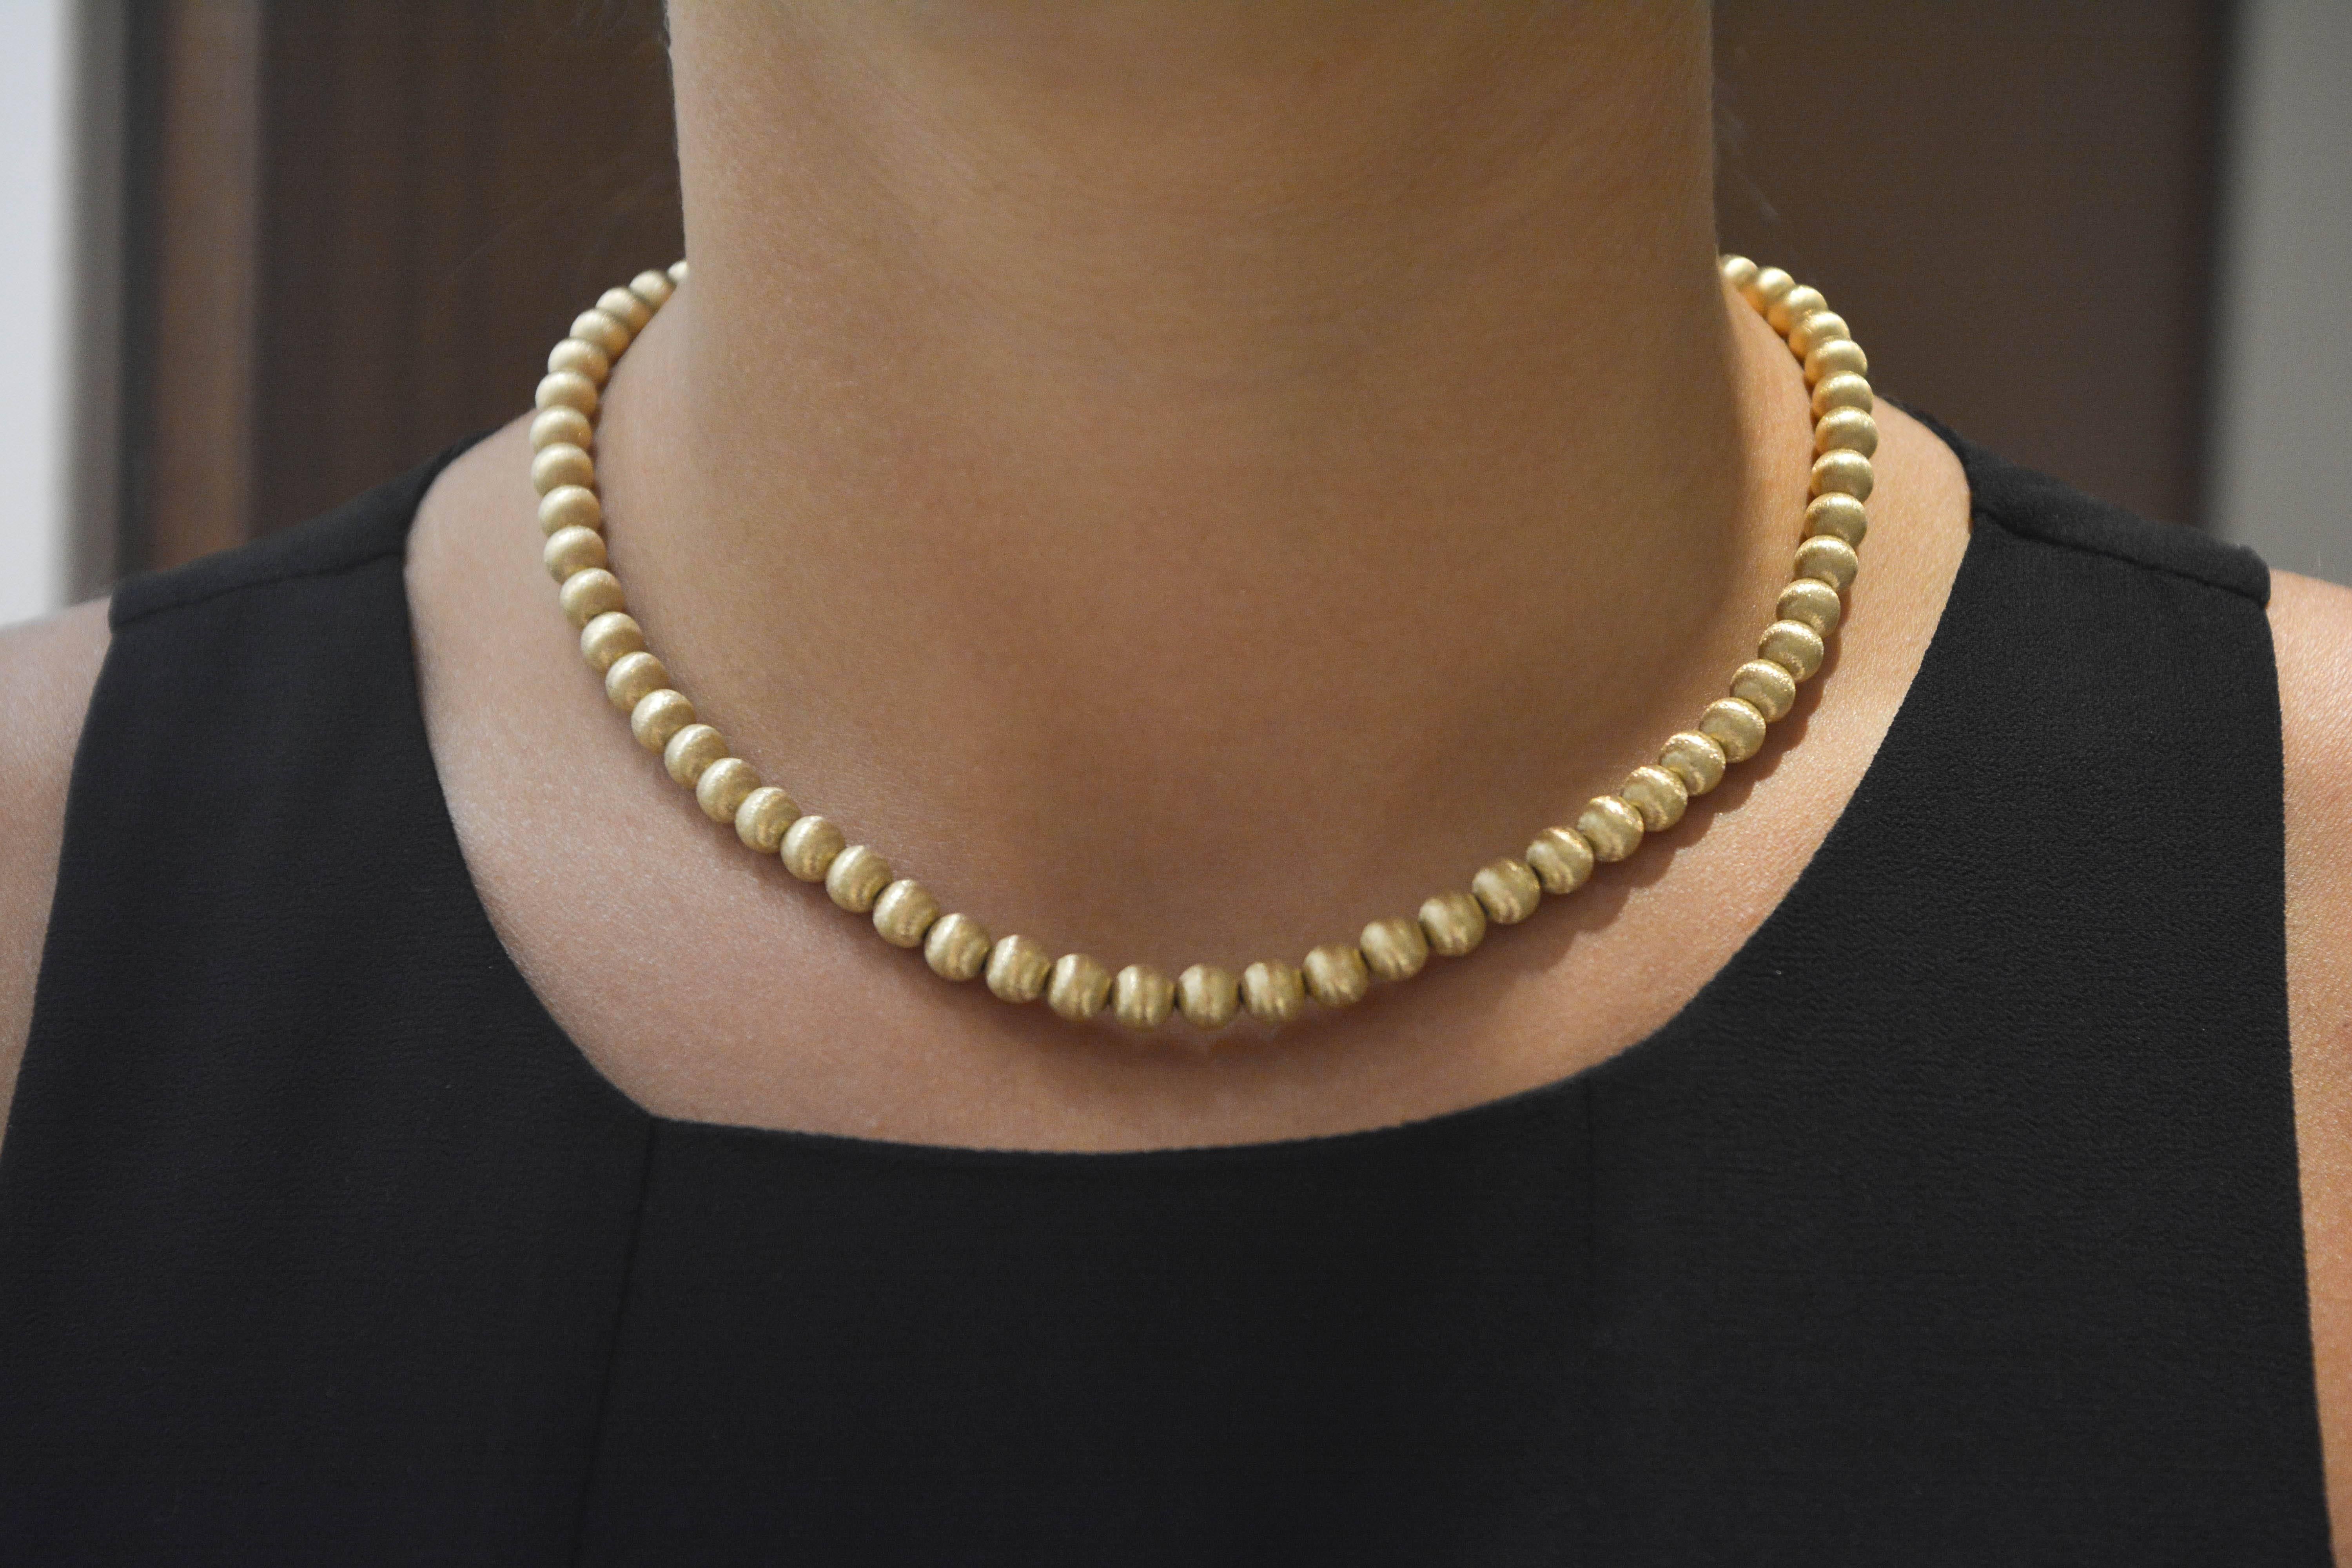 Women's or Men's 14kt Yellow Gold Textured Bead Necklace